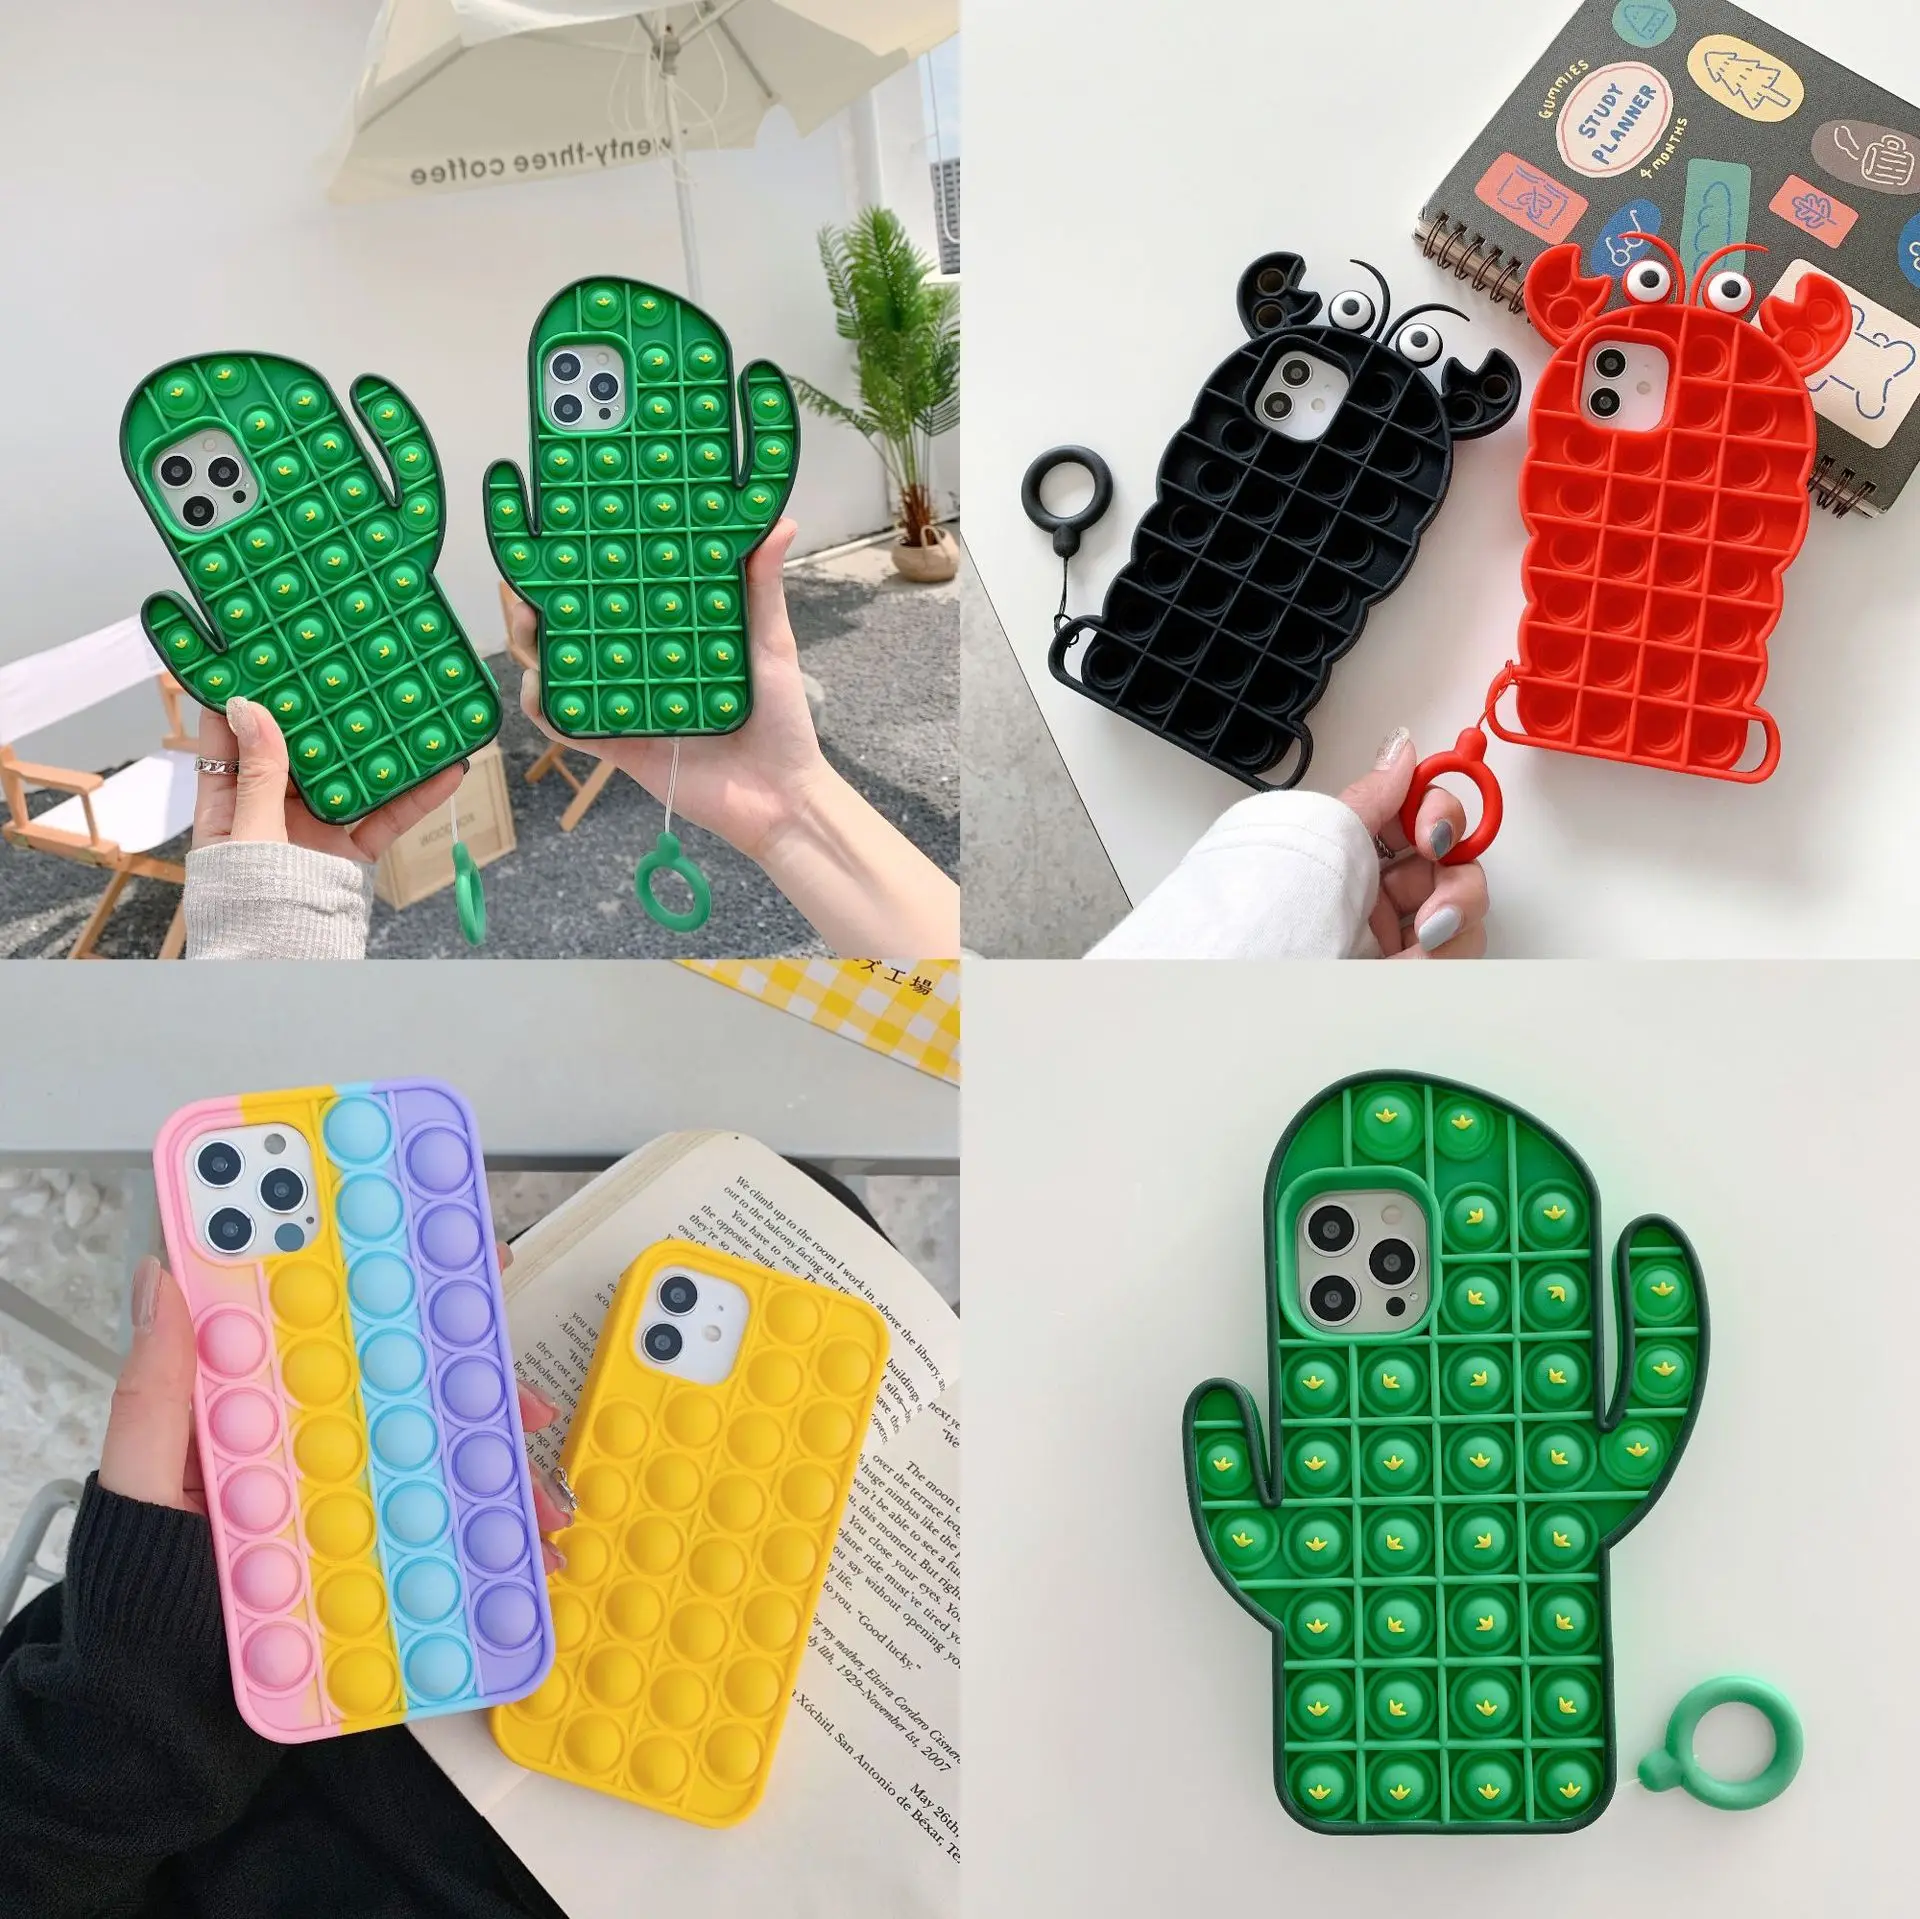 

DDA2392 Soft Cactus Simple Dimple Phone Shell Silicone Sensory Mobile Phone Cover Push Bubble Fidget Toy Phone Case, 6 colors